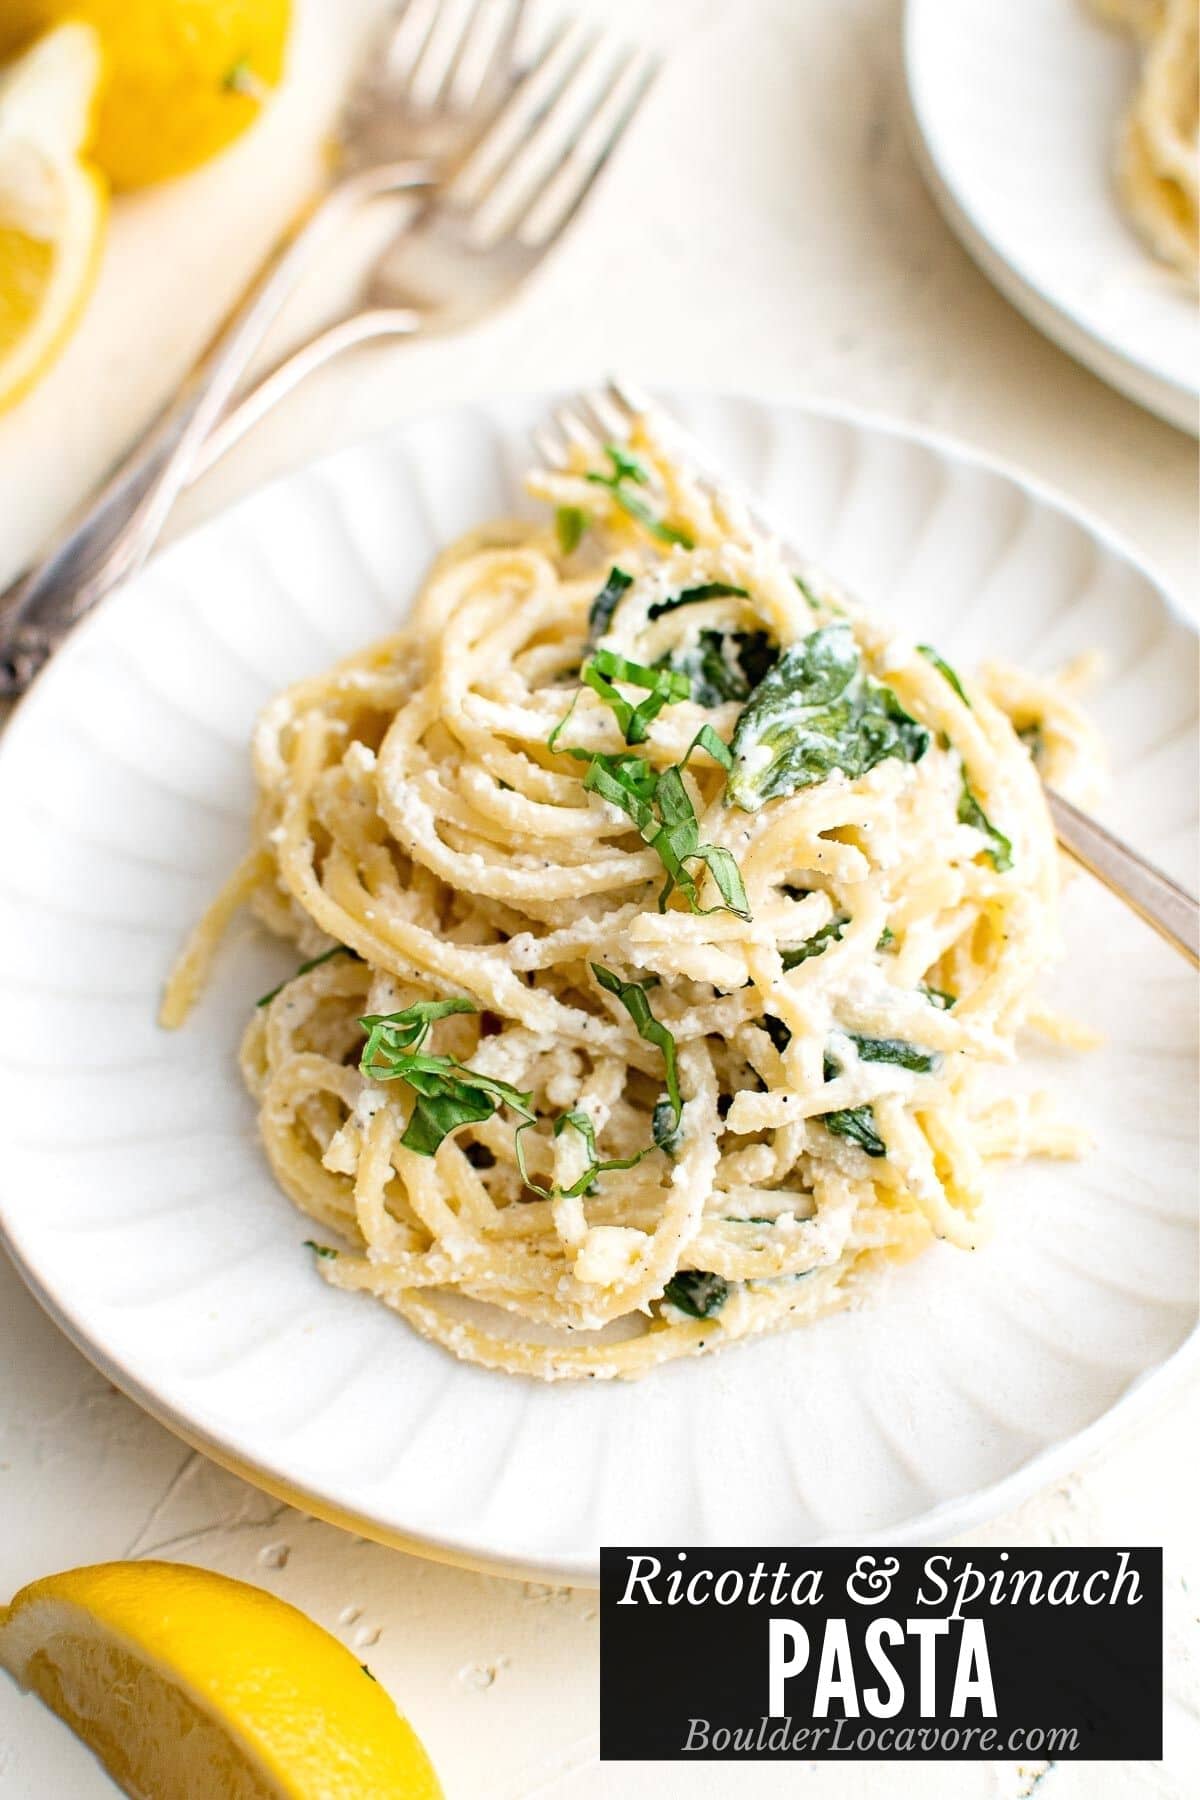 RICOTTA AND SPINACH PASTA